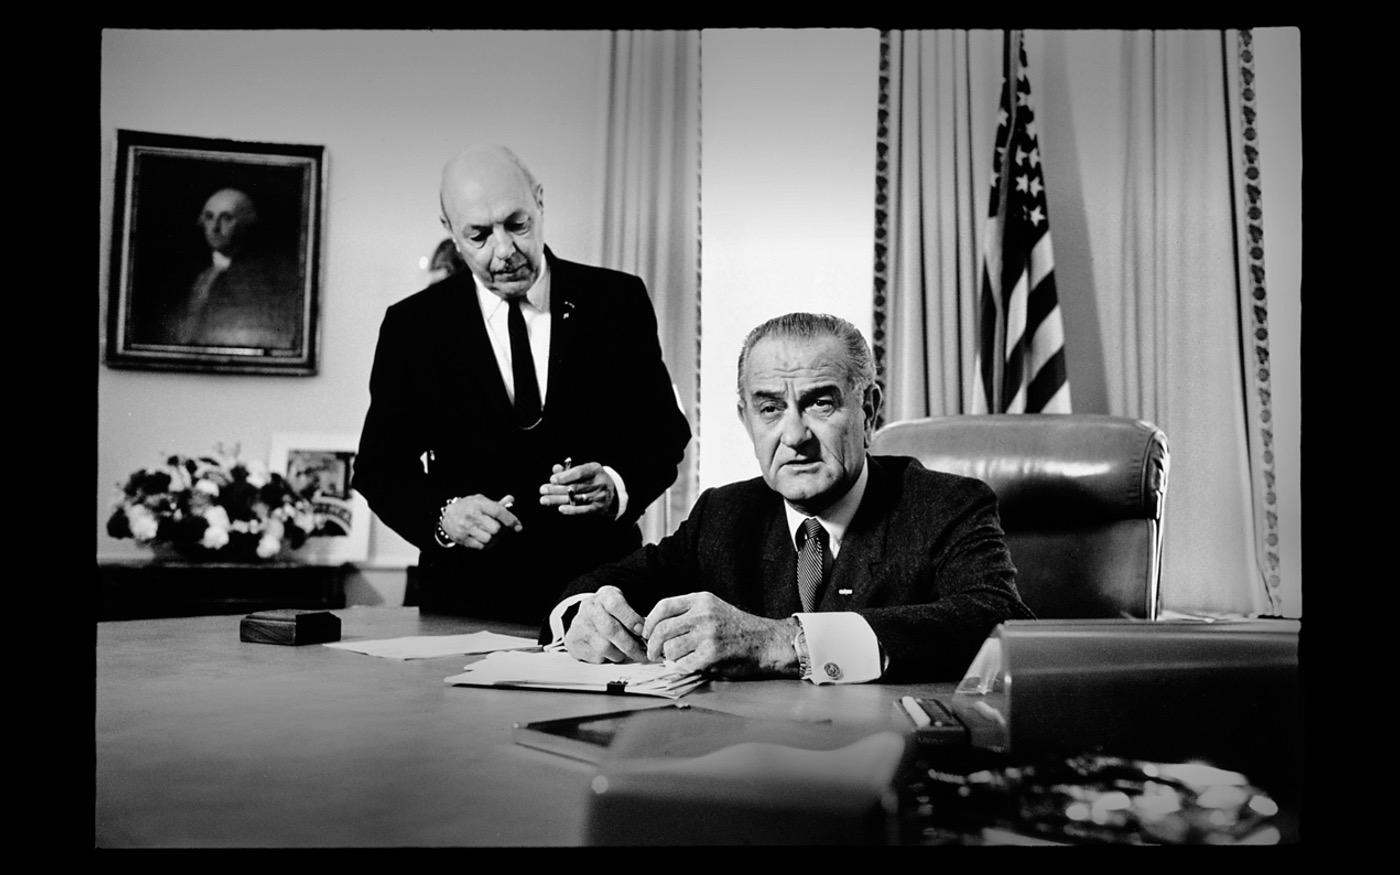 President Lyndon Johnson signing a bill: 1968
the Oval Office : Looking Back: 60 Years of Photographs : David Burnett | Photographer